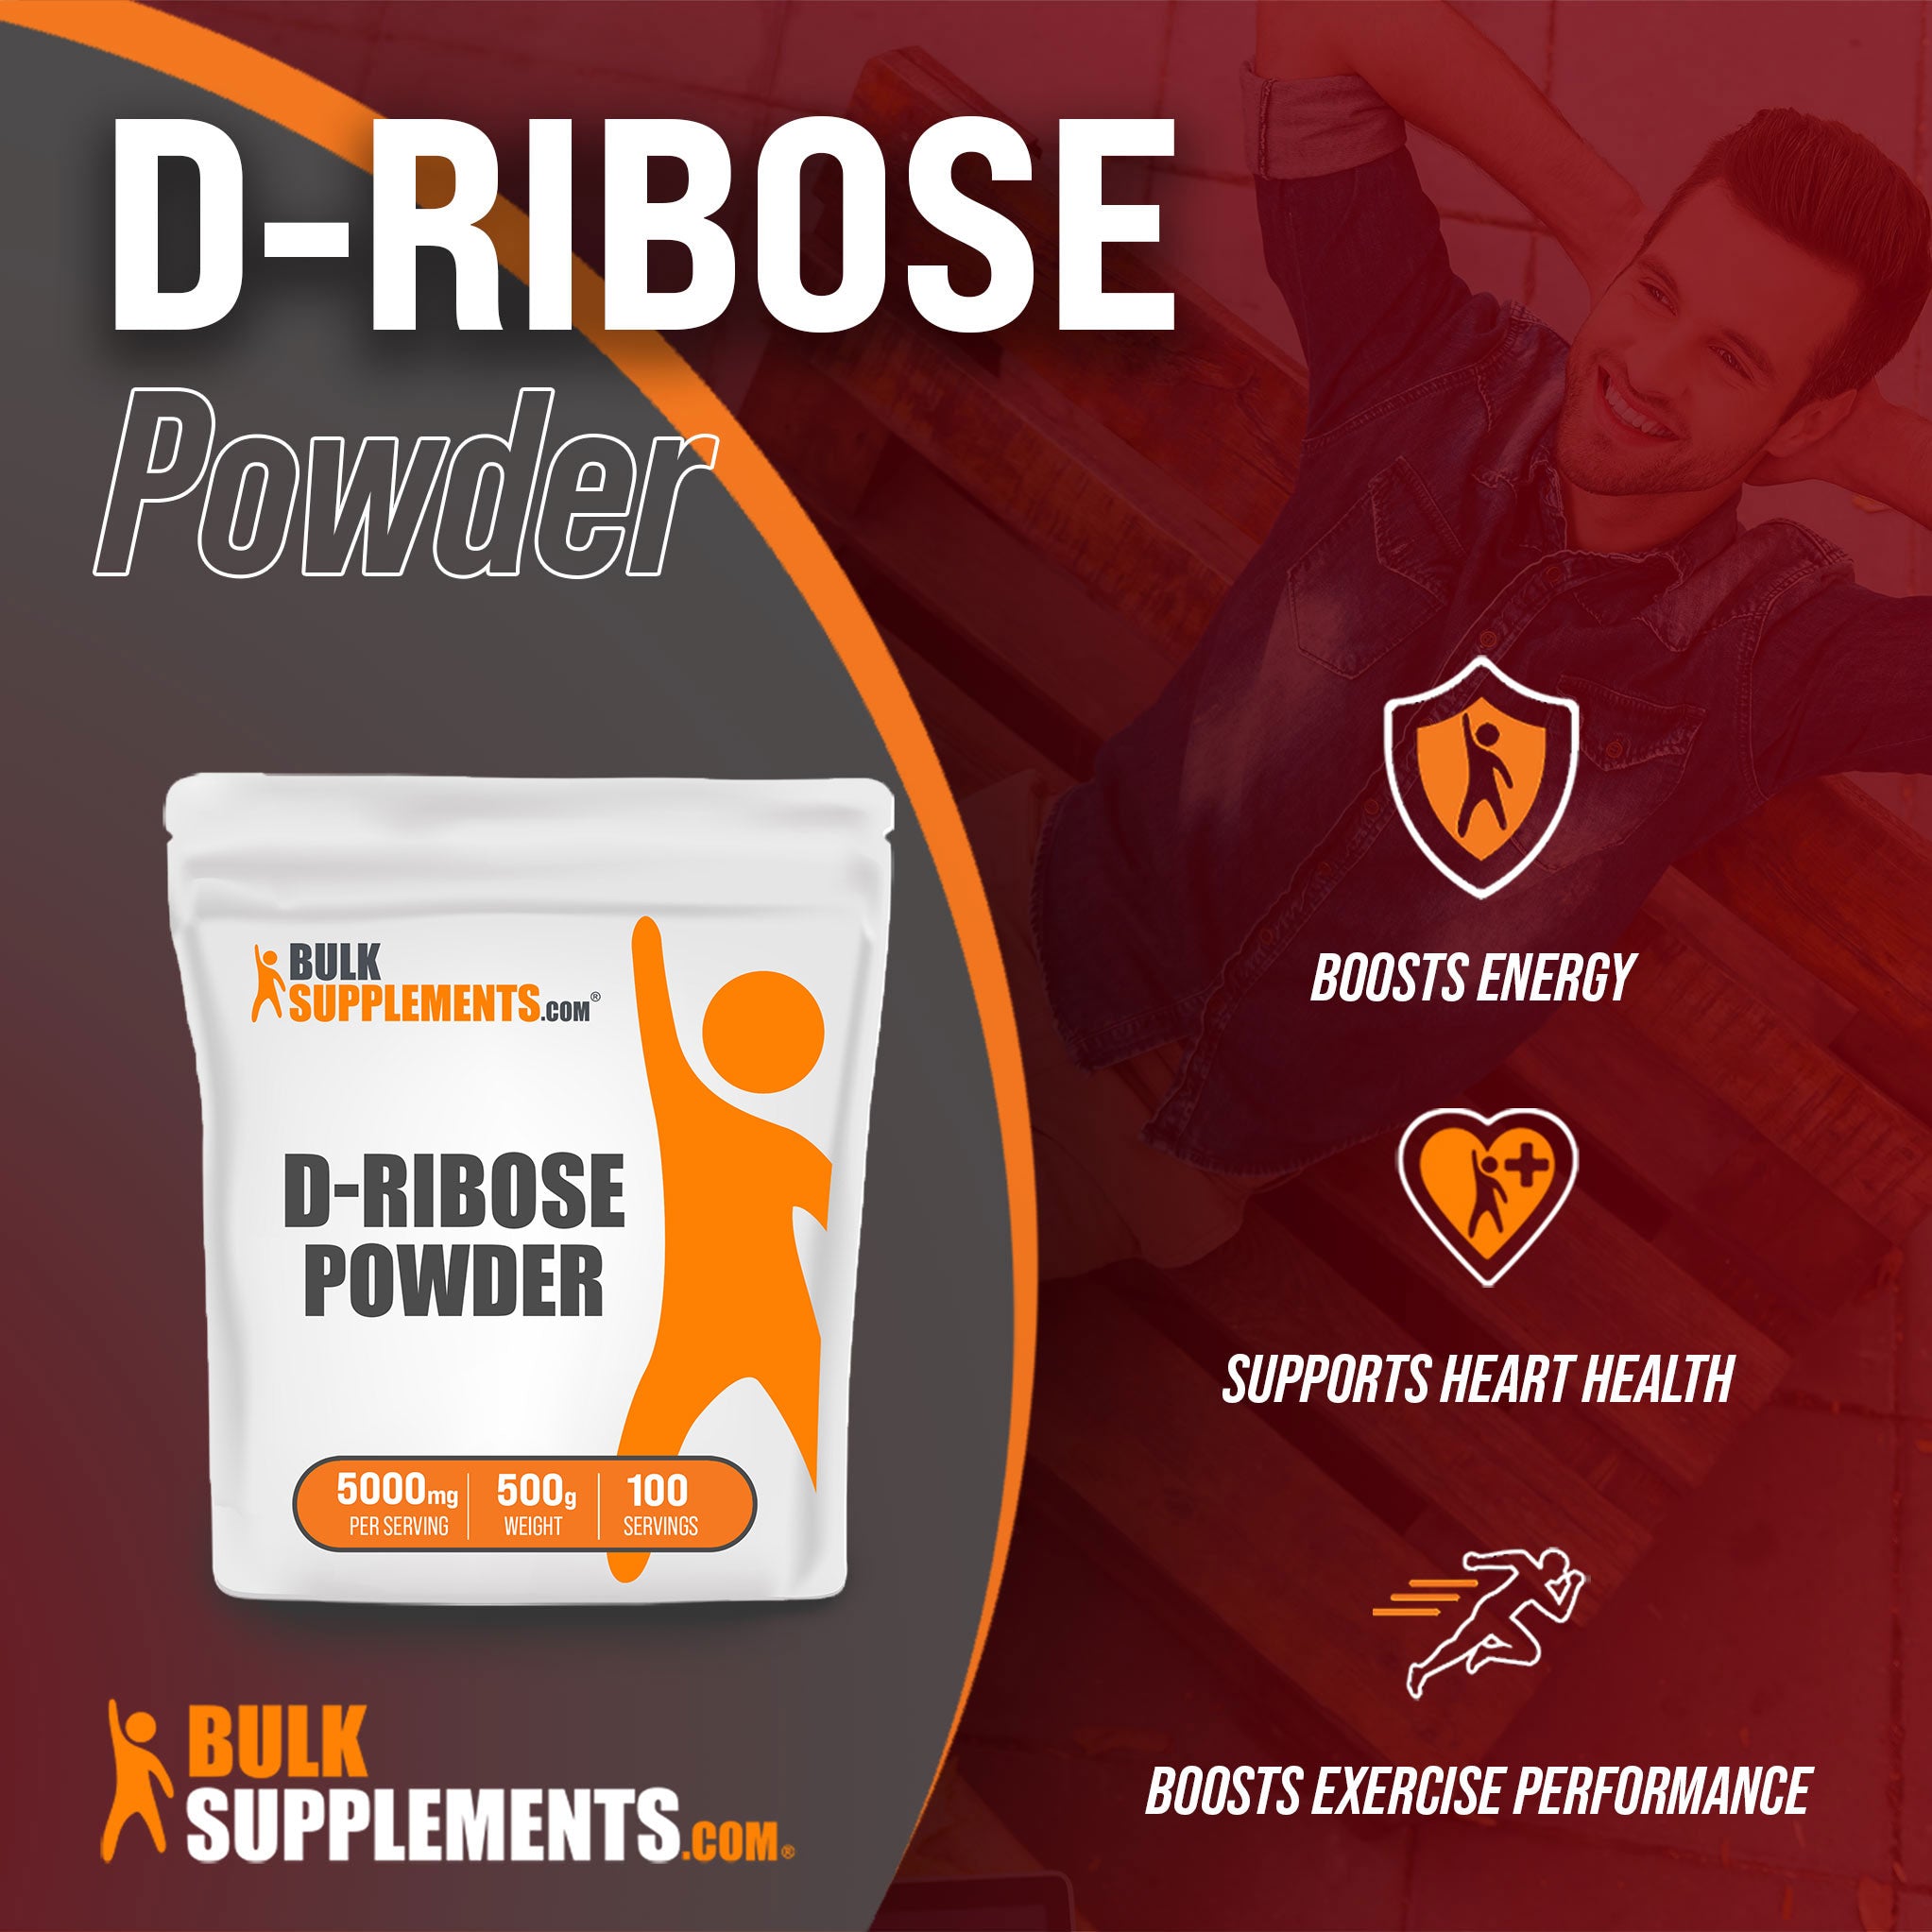 Benefits of D-Ribose; boosts energy, supports heart health, boosts exercise performance